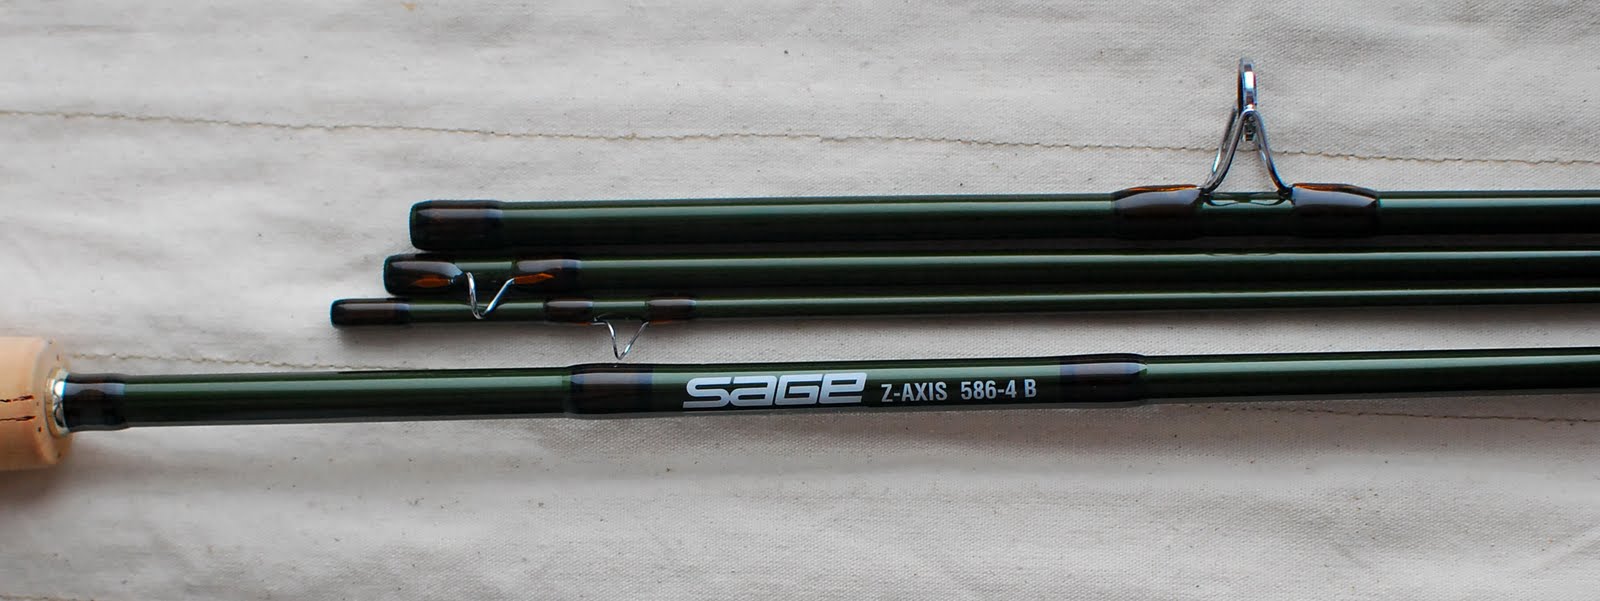 Handcrafted graphite and fiberglass fly rods: Sage Z-Axis 586-4